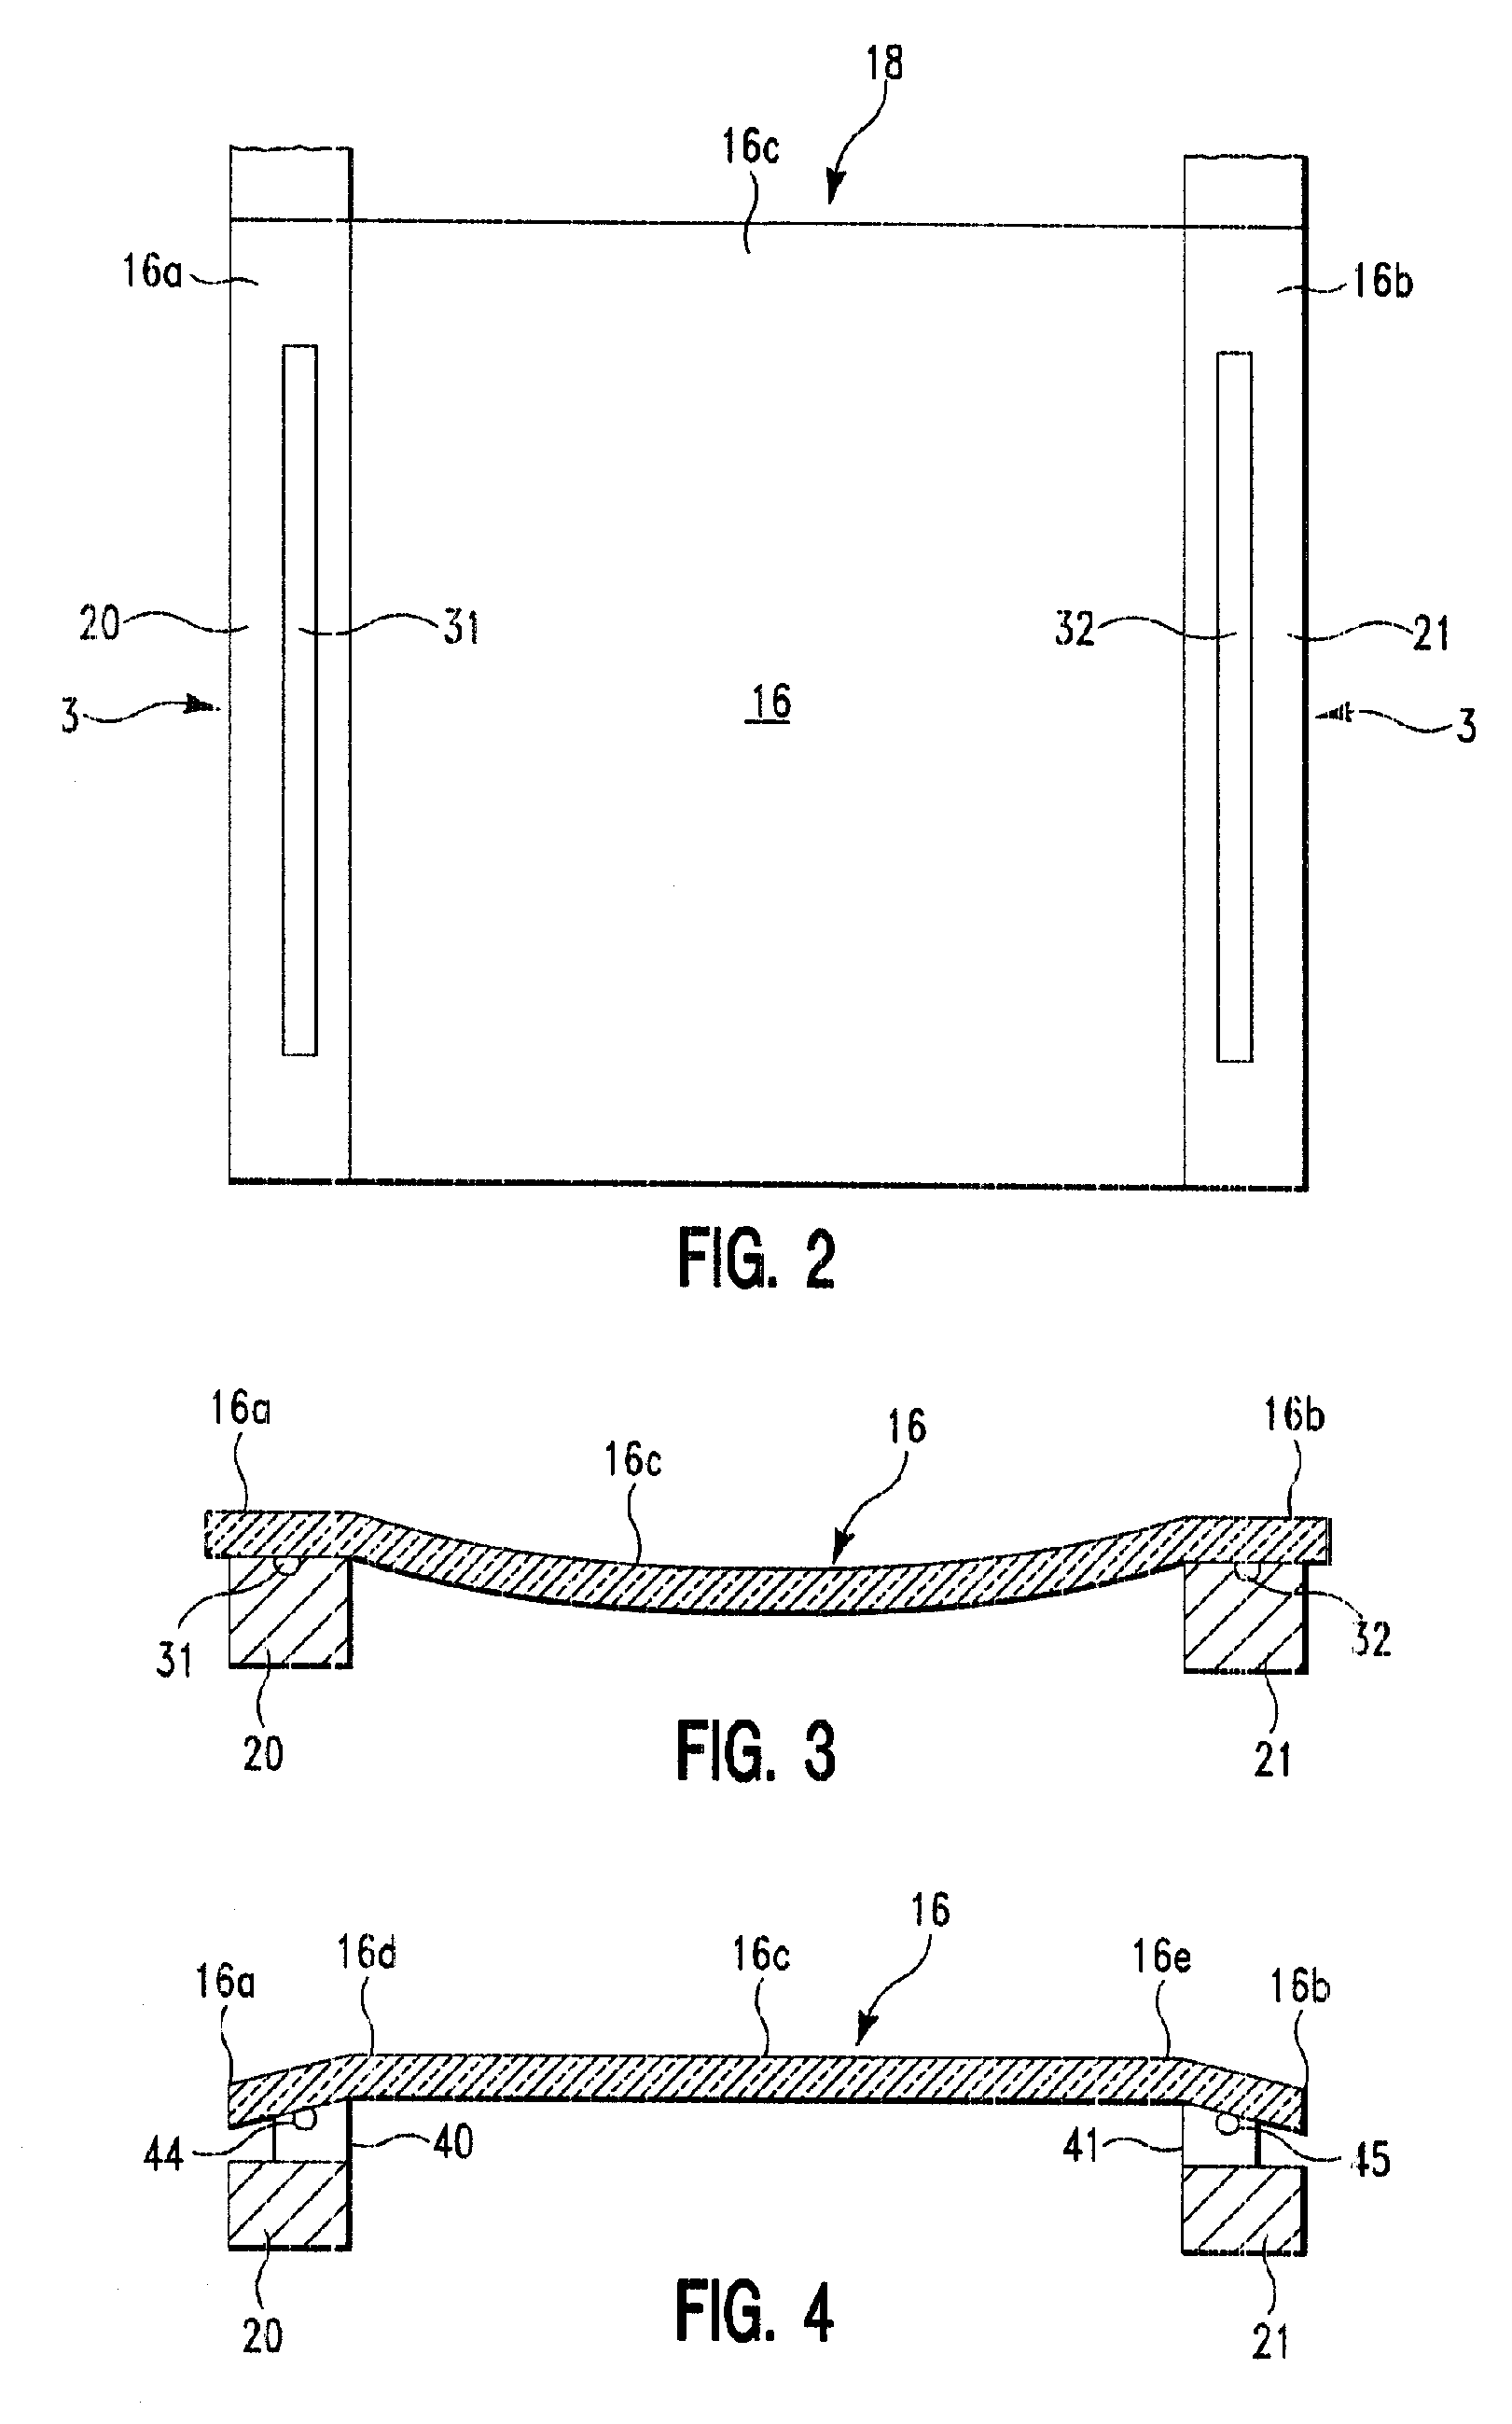 A method and apparatus for correcting gravitational sag in photomasks used in the production of electronic devices